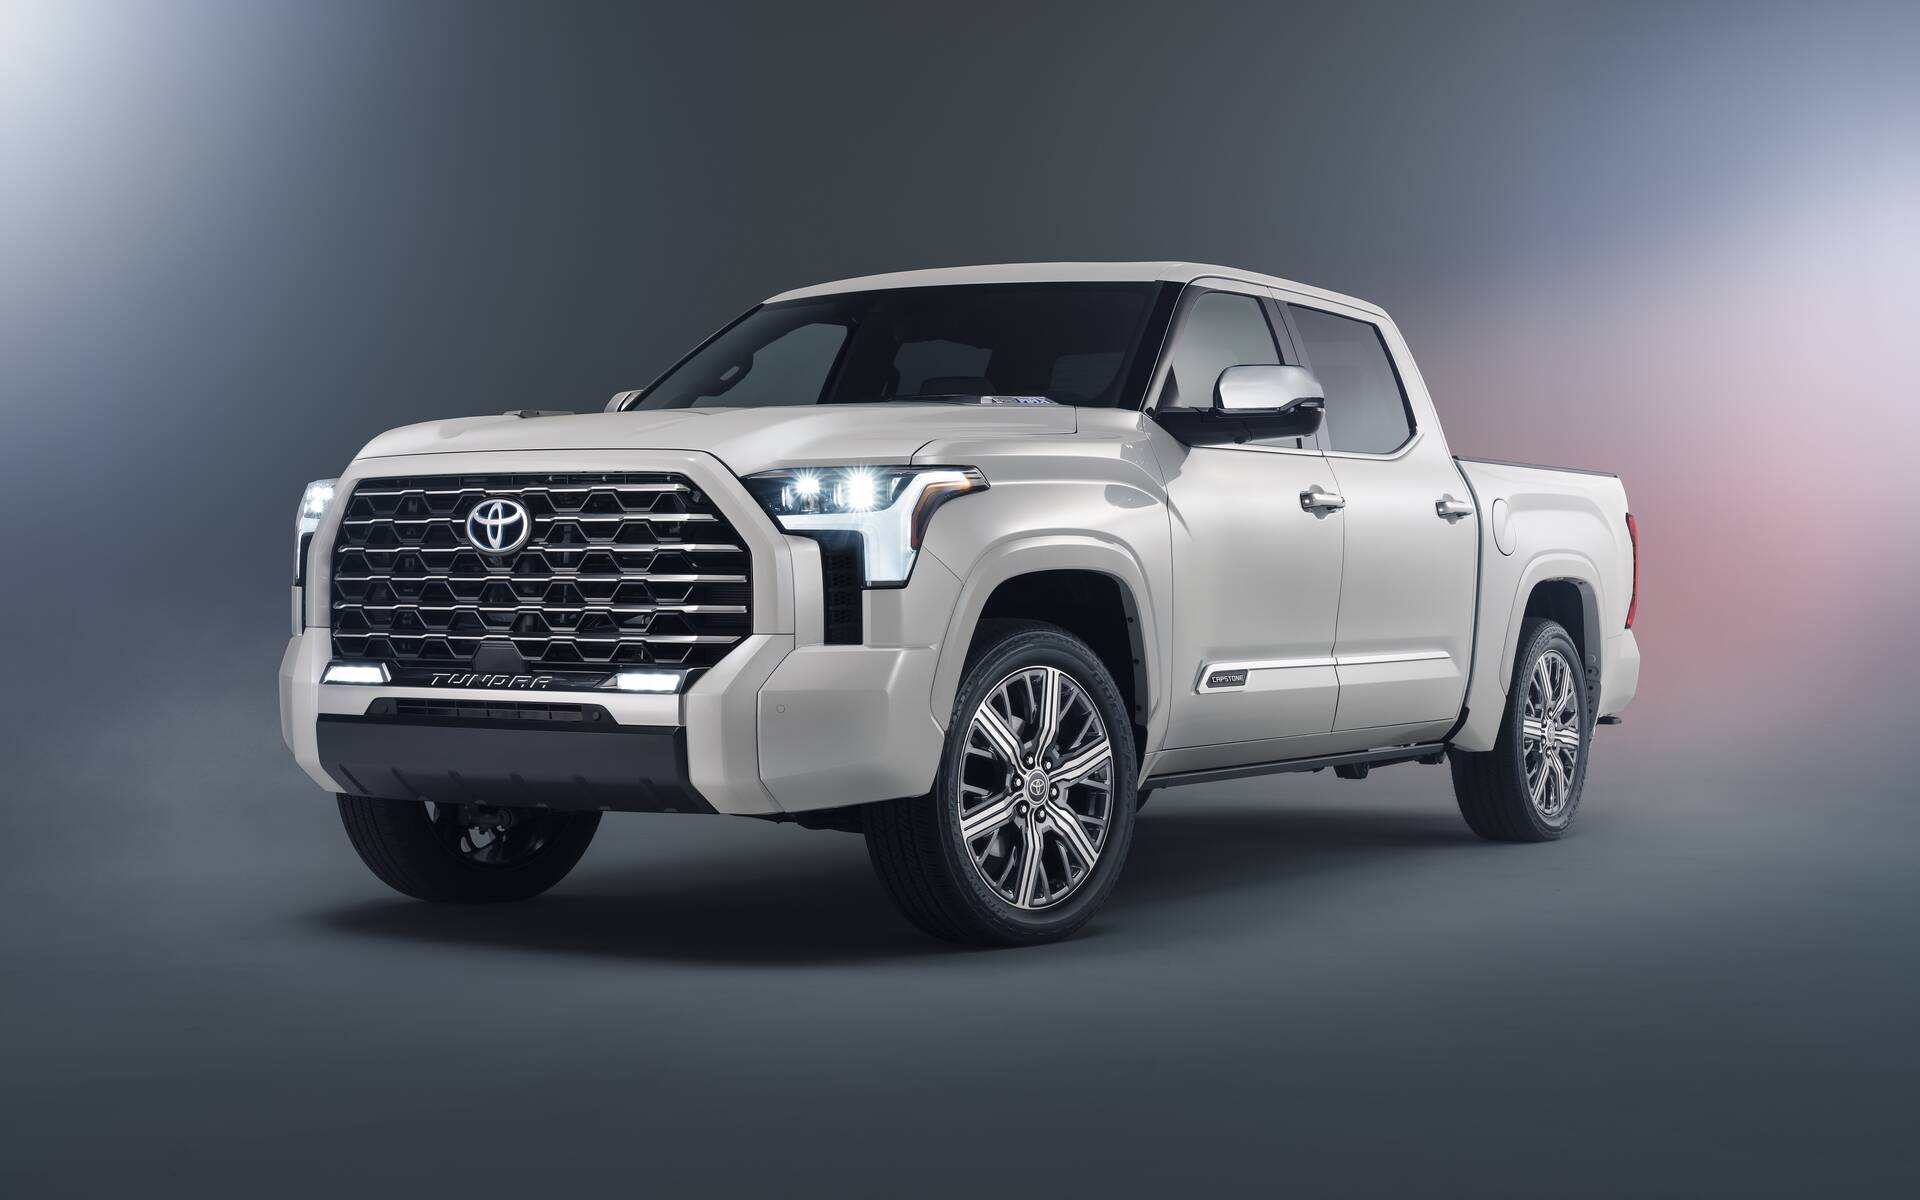 Melbourne Azijn Vlek 2022 Toyota Tundra Capstone Takes Luxury to New Heights - The Car Guide